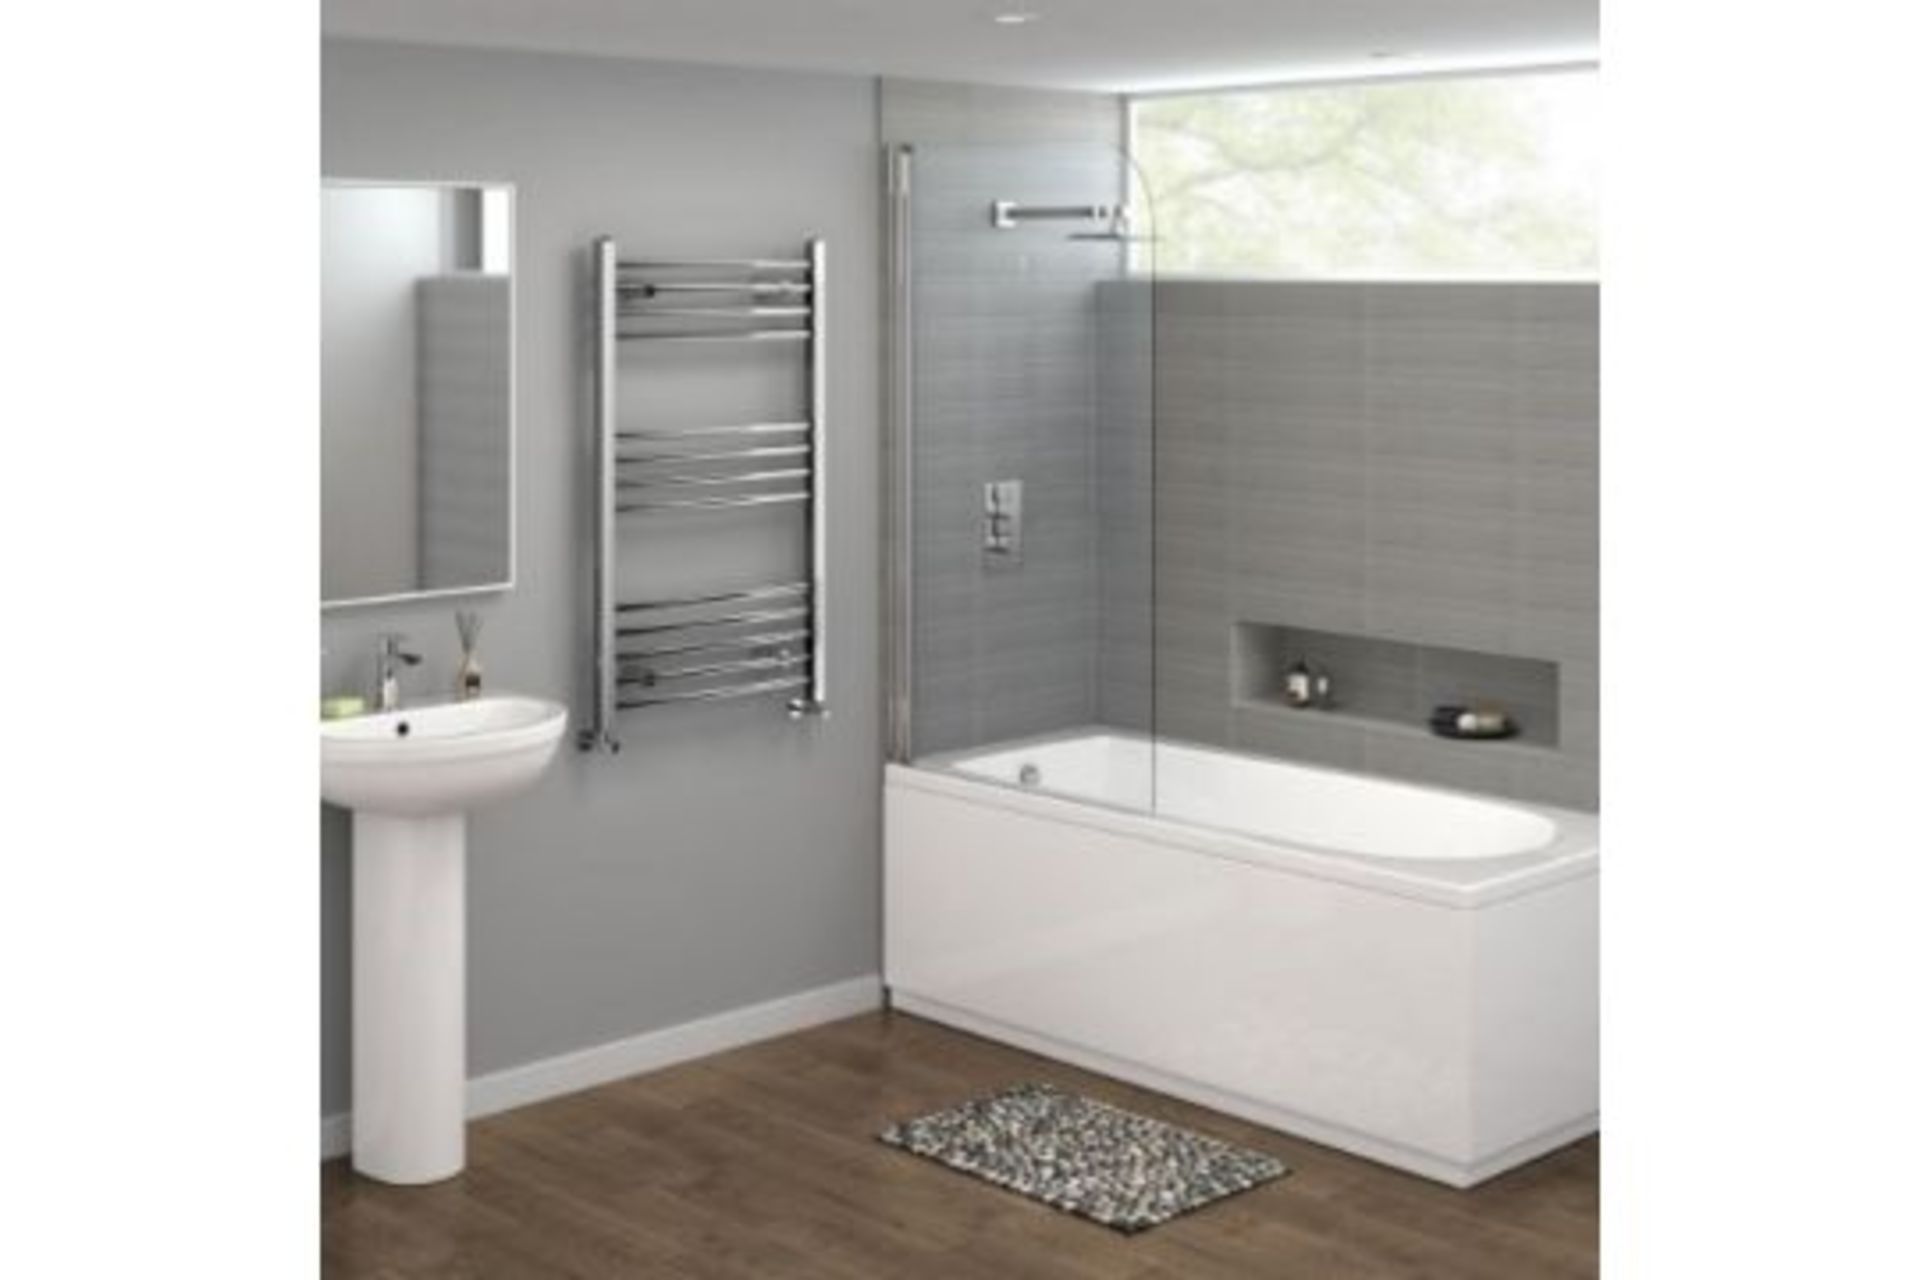 NEW & BOXED 1200x500mm - 20mm Tubes - RRP £219.99.Chrome Curved Rail Ladder Towel Radiator.Our... - Image 2 of 2